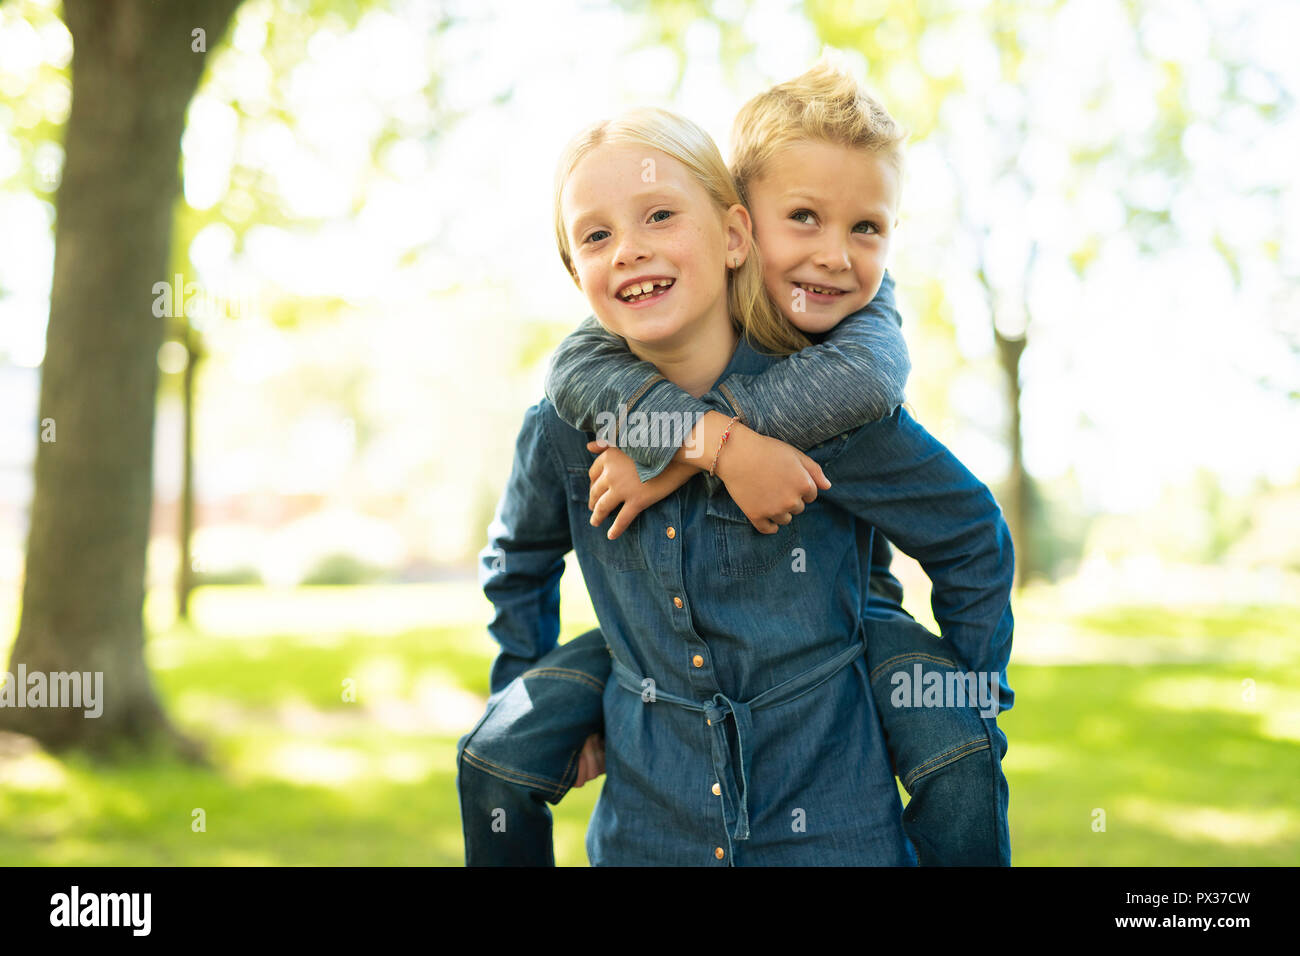 A Picture of brother and sister having fun in the park Stock Photo